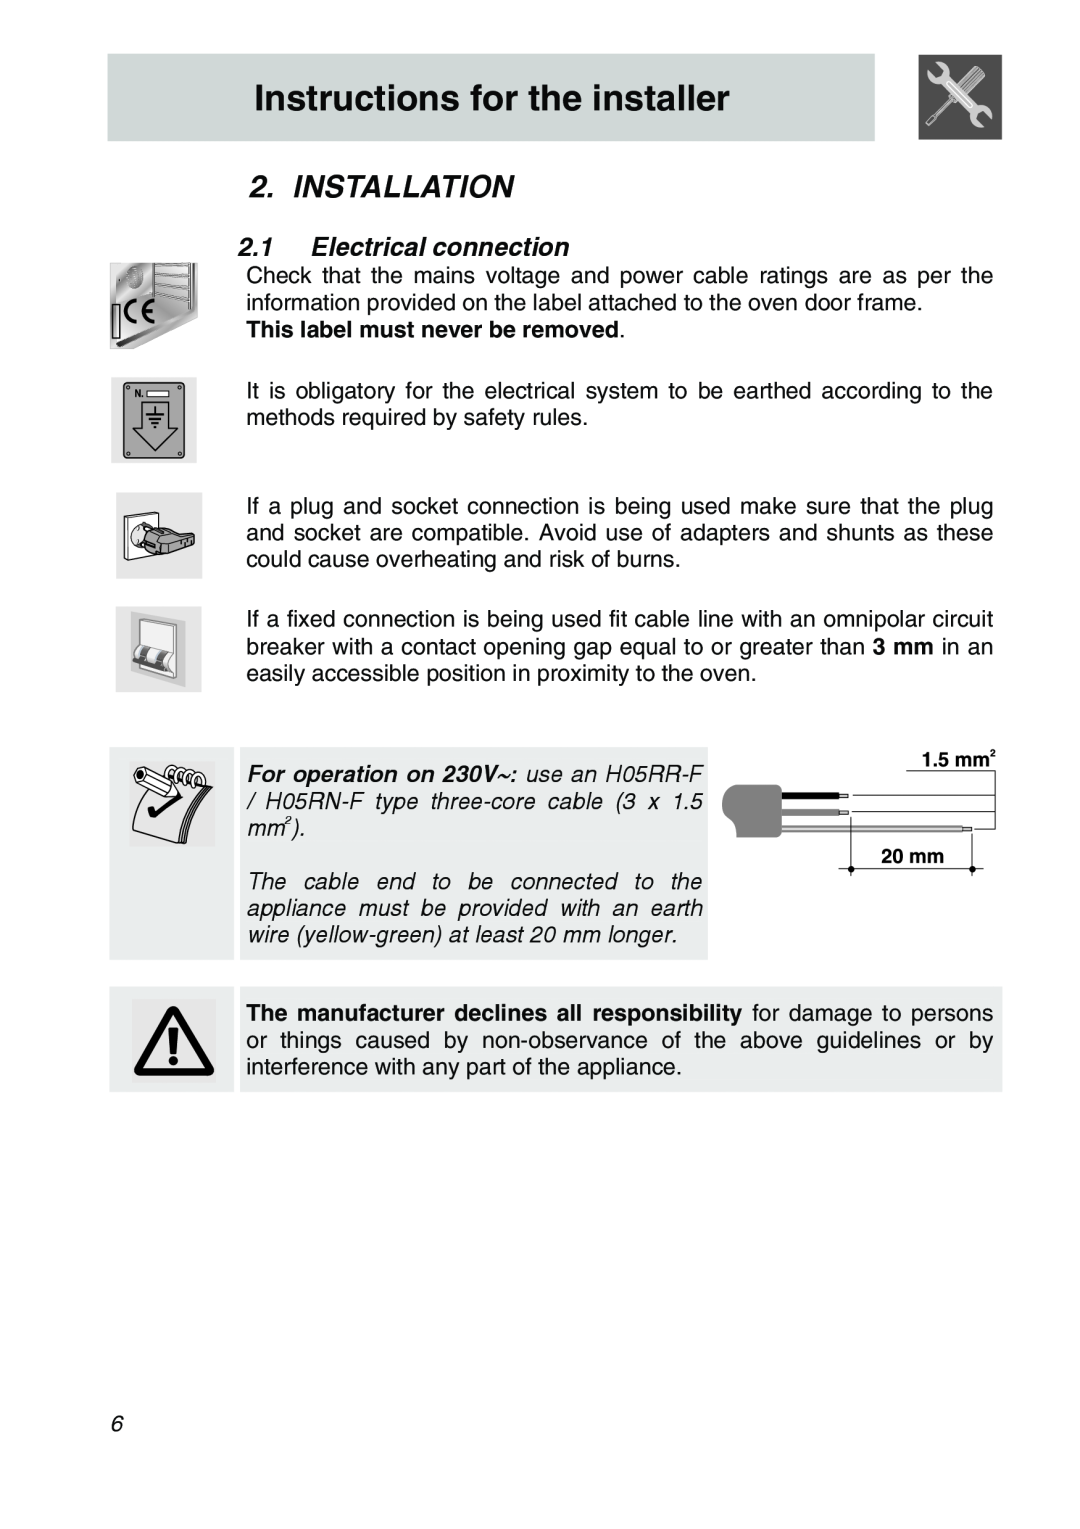 Smeg SA301W-5 Instructions for the installer, Installation, 2.1Electrical connection, This label must never be removed 